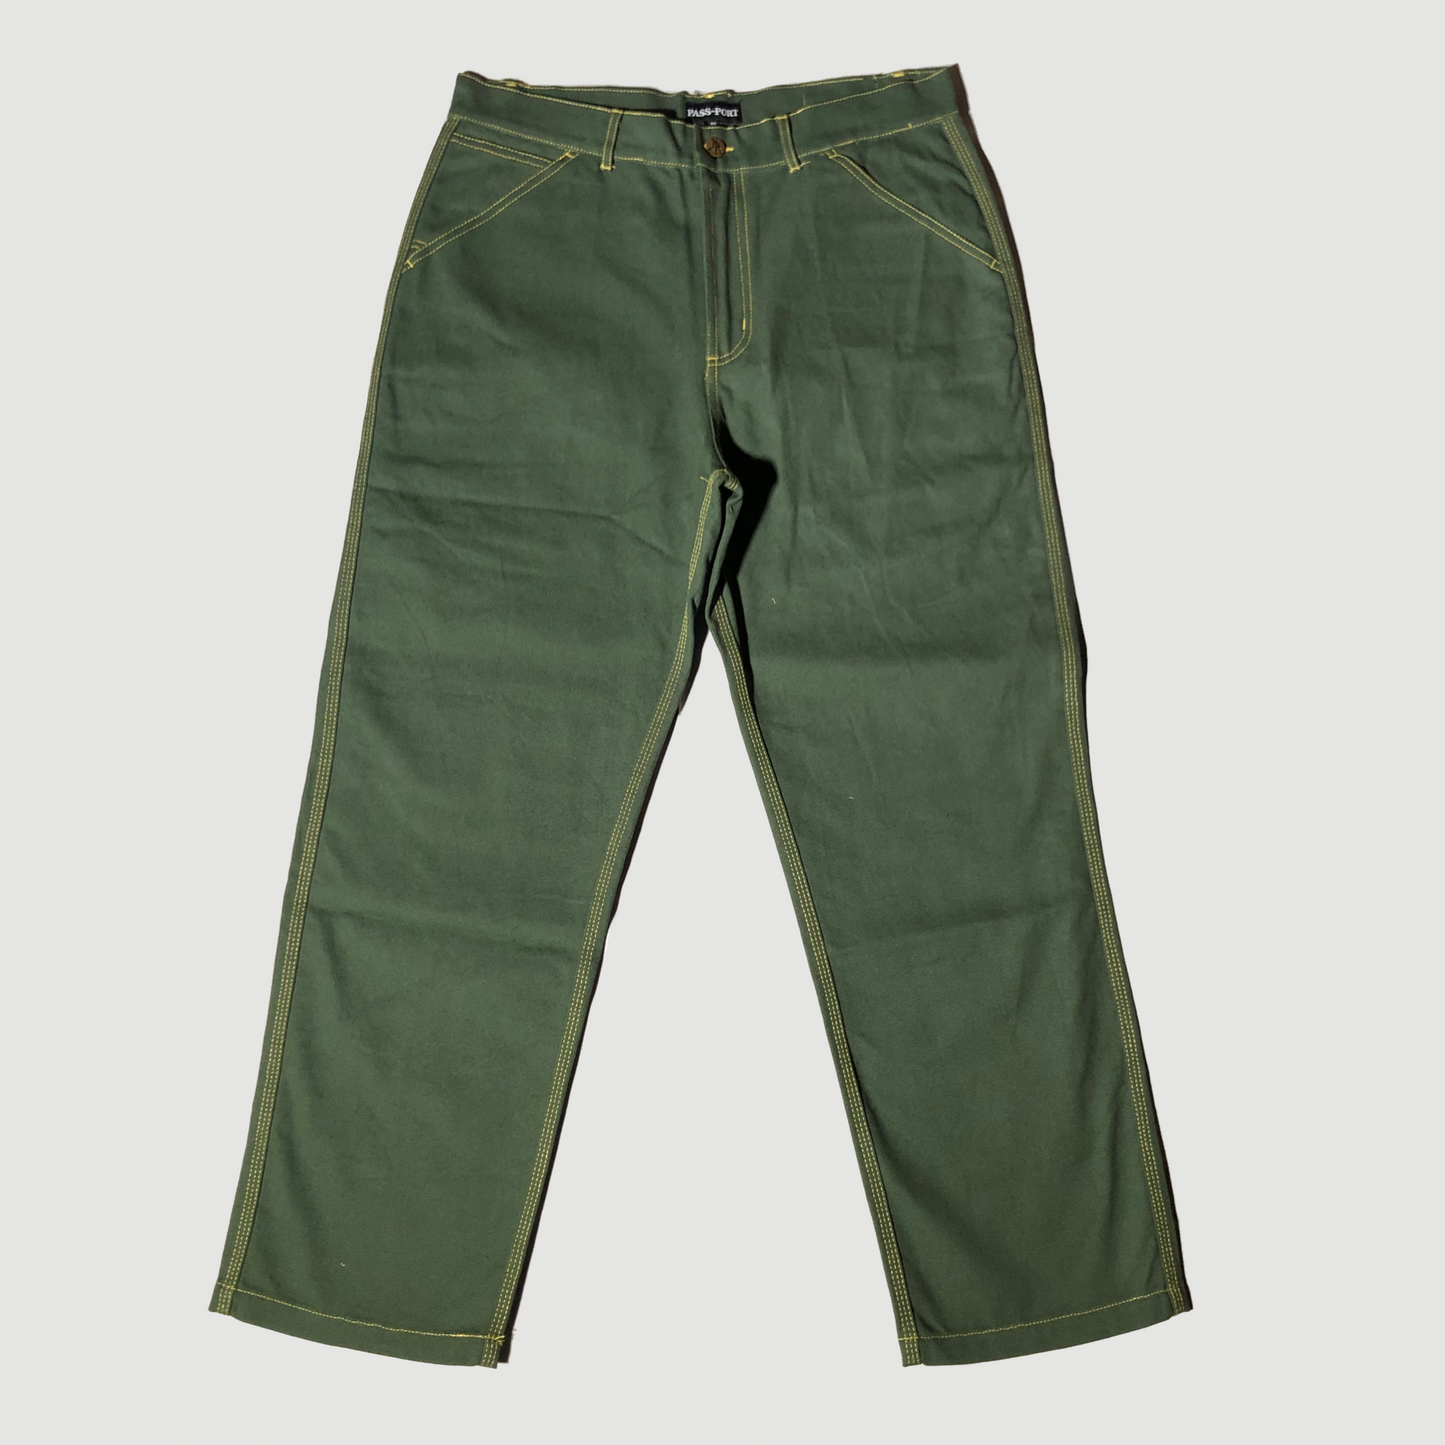 Pass~Port Diggers Club Pant Olive